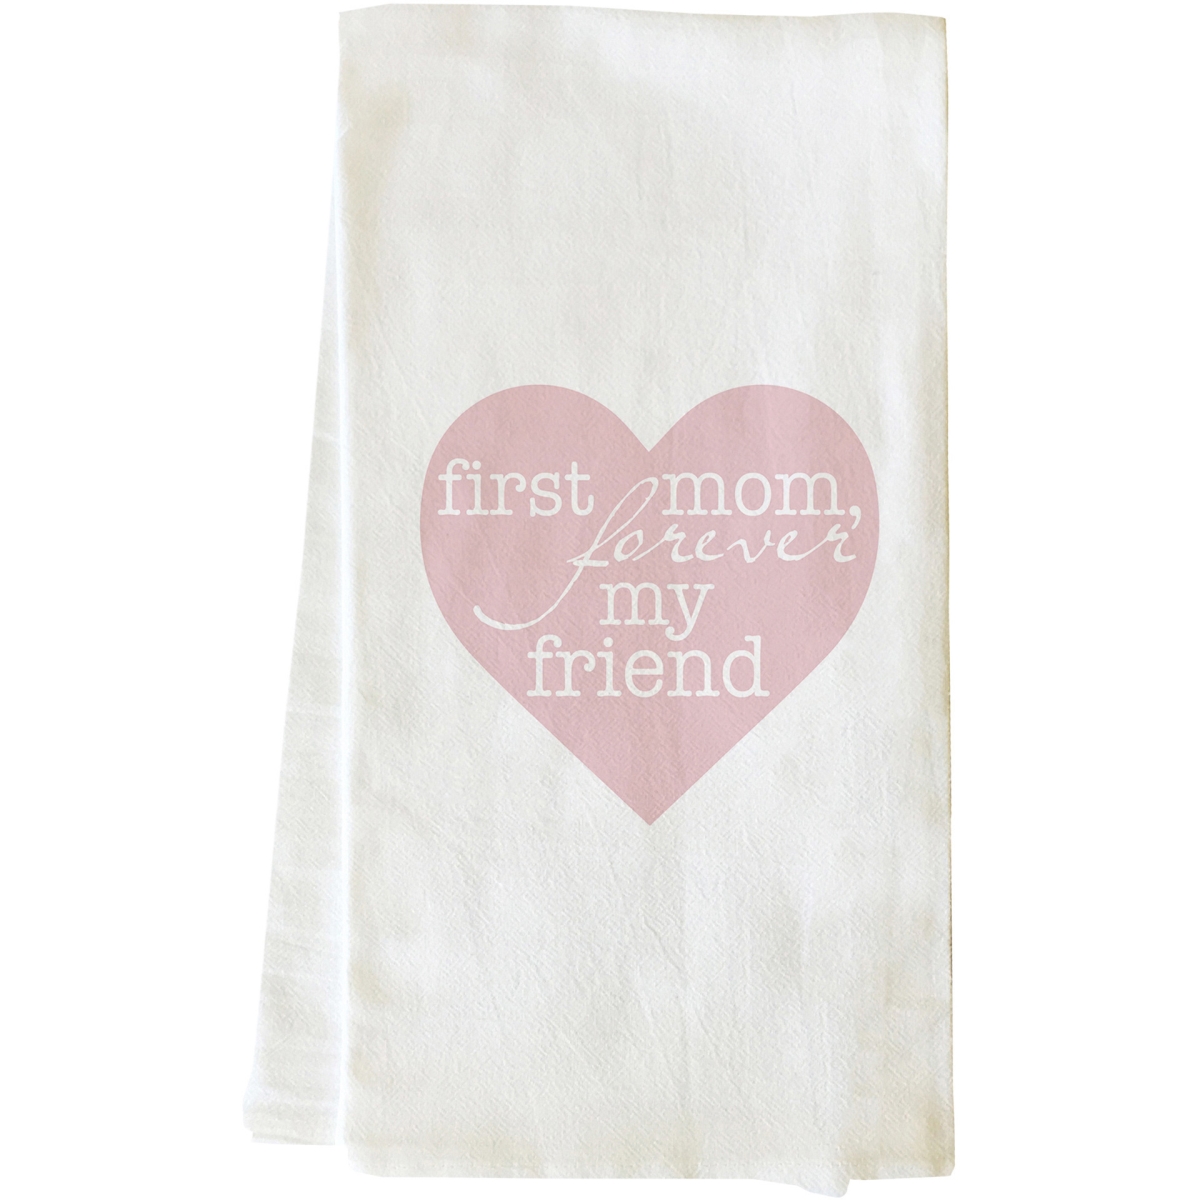 74889tw First Mom Forever Friend Tea Towel - Blush Pink